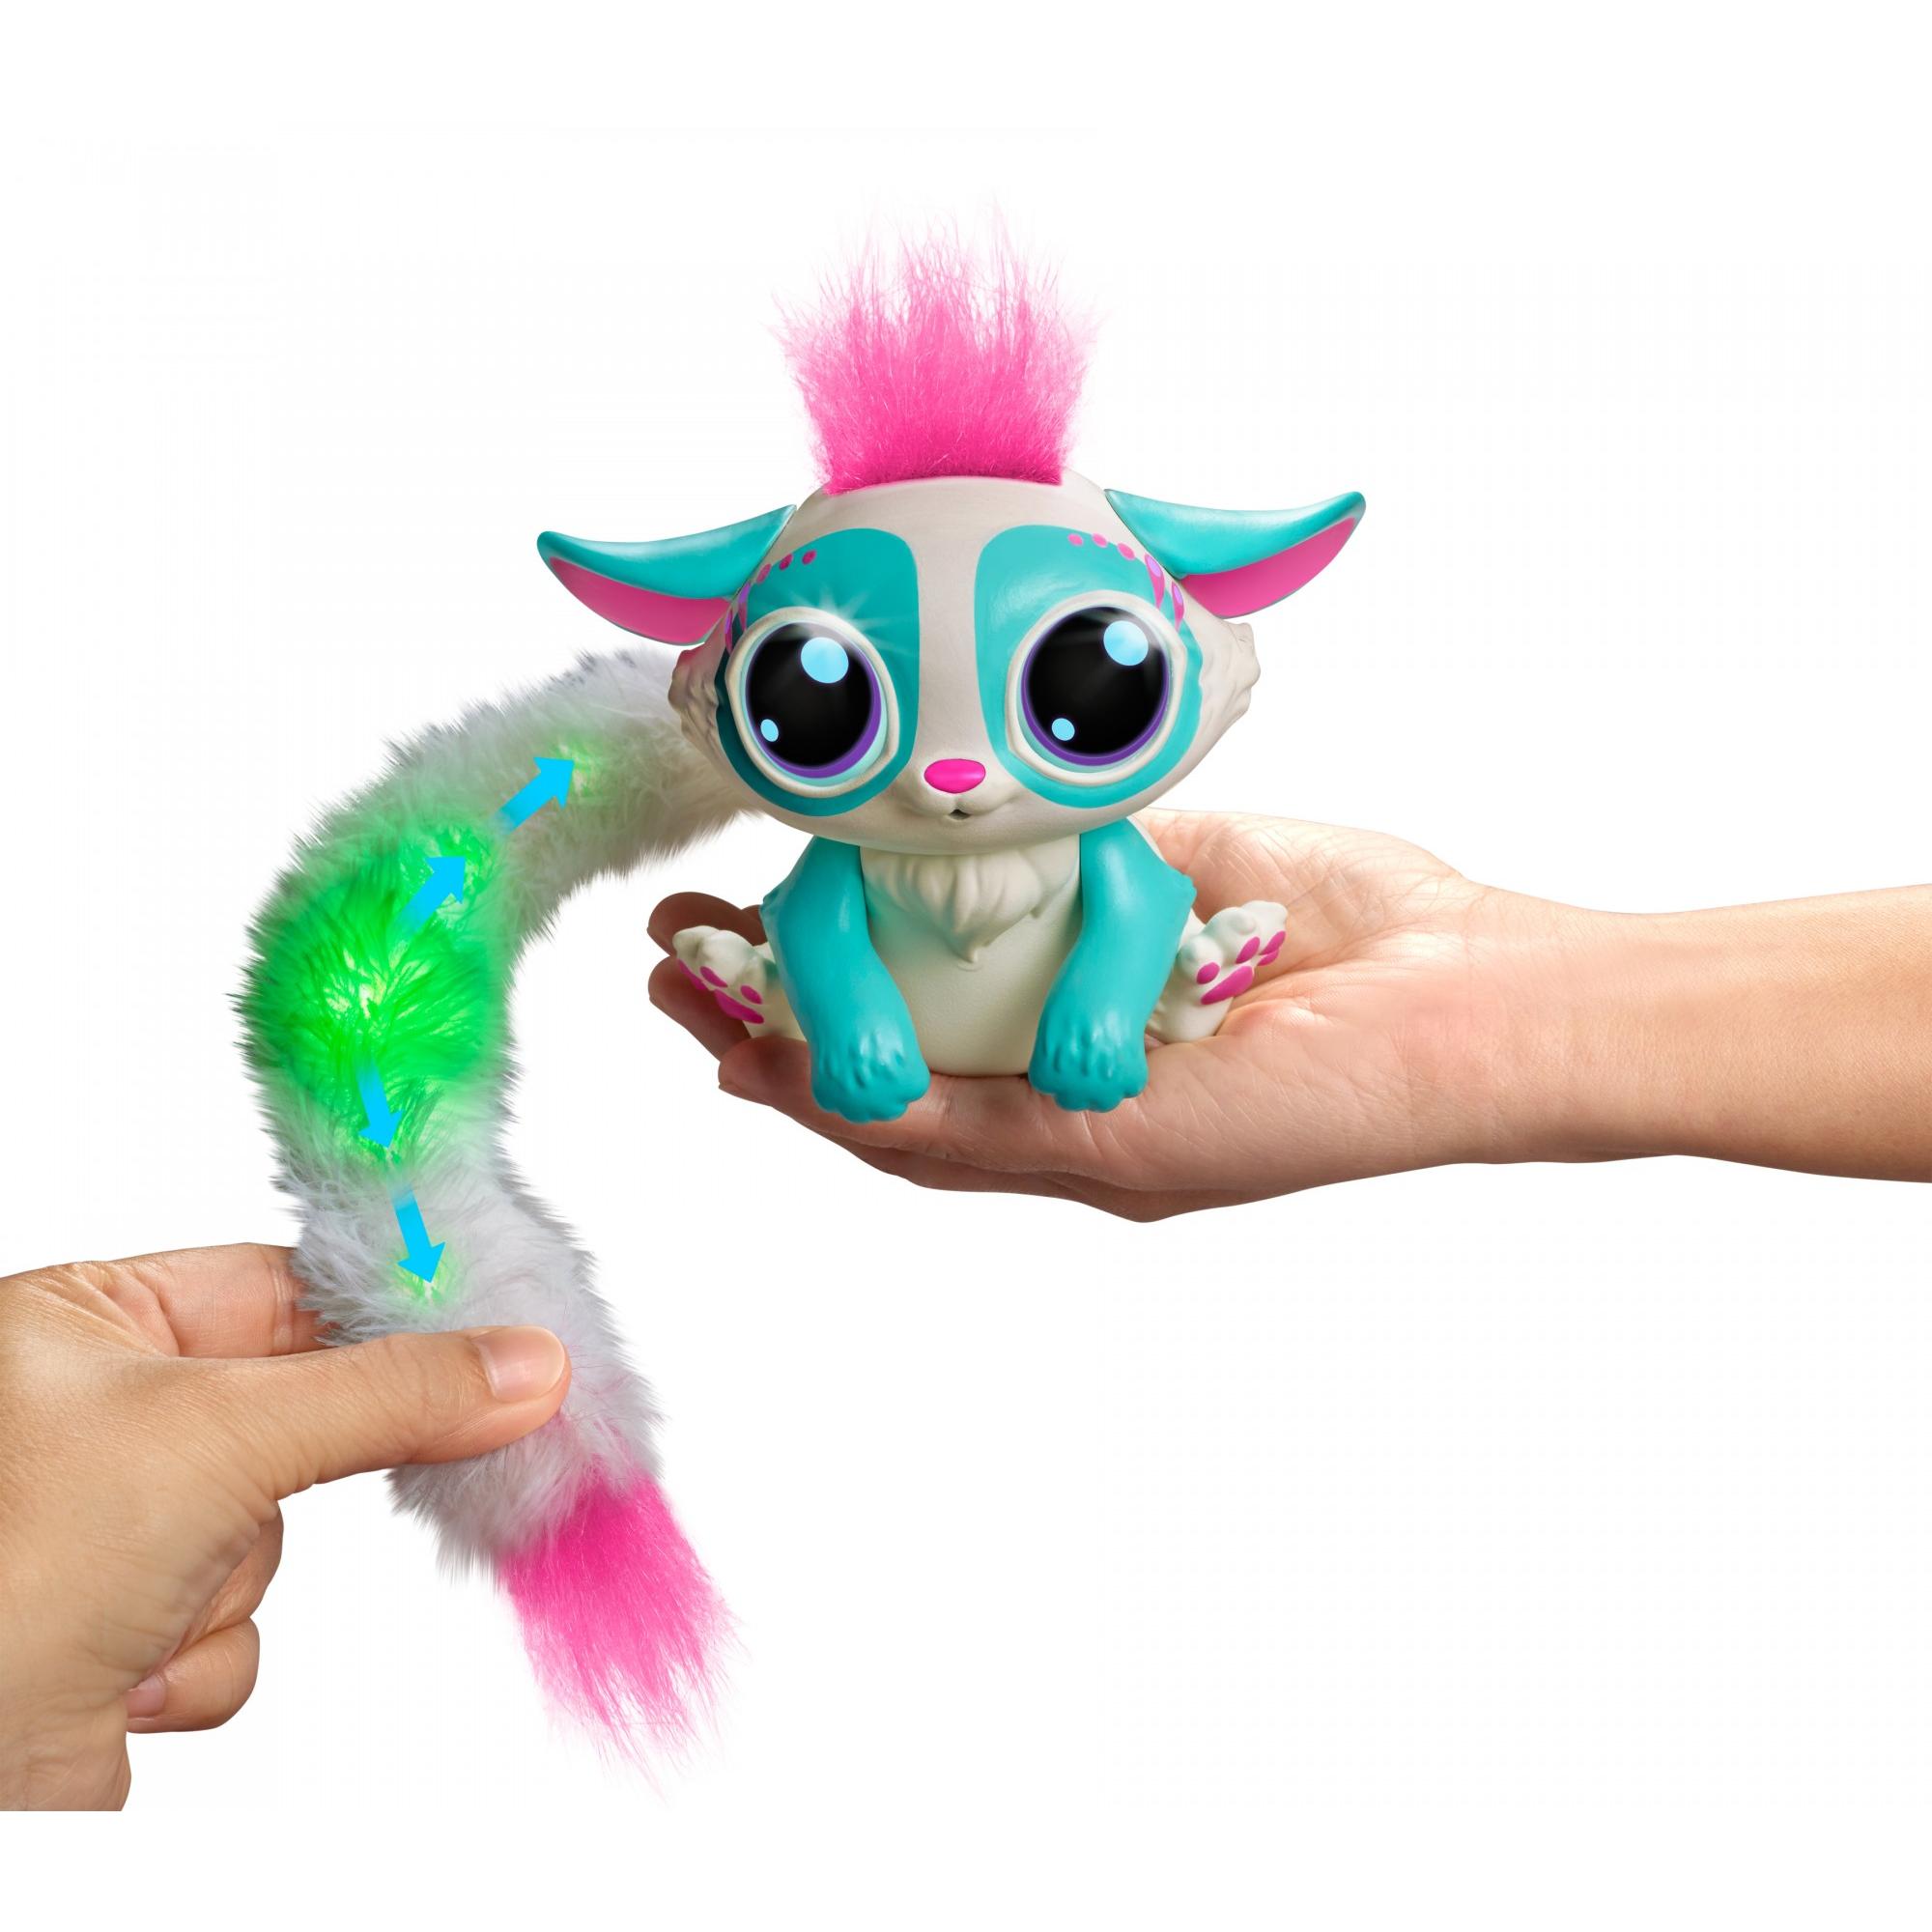 Lil' Gleemerz Amiglow Furry Friend, Light Up Interactive Talking Toy - image 5 of 10